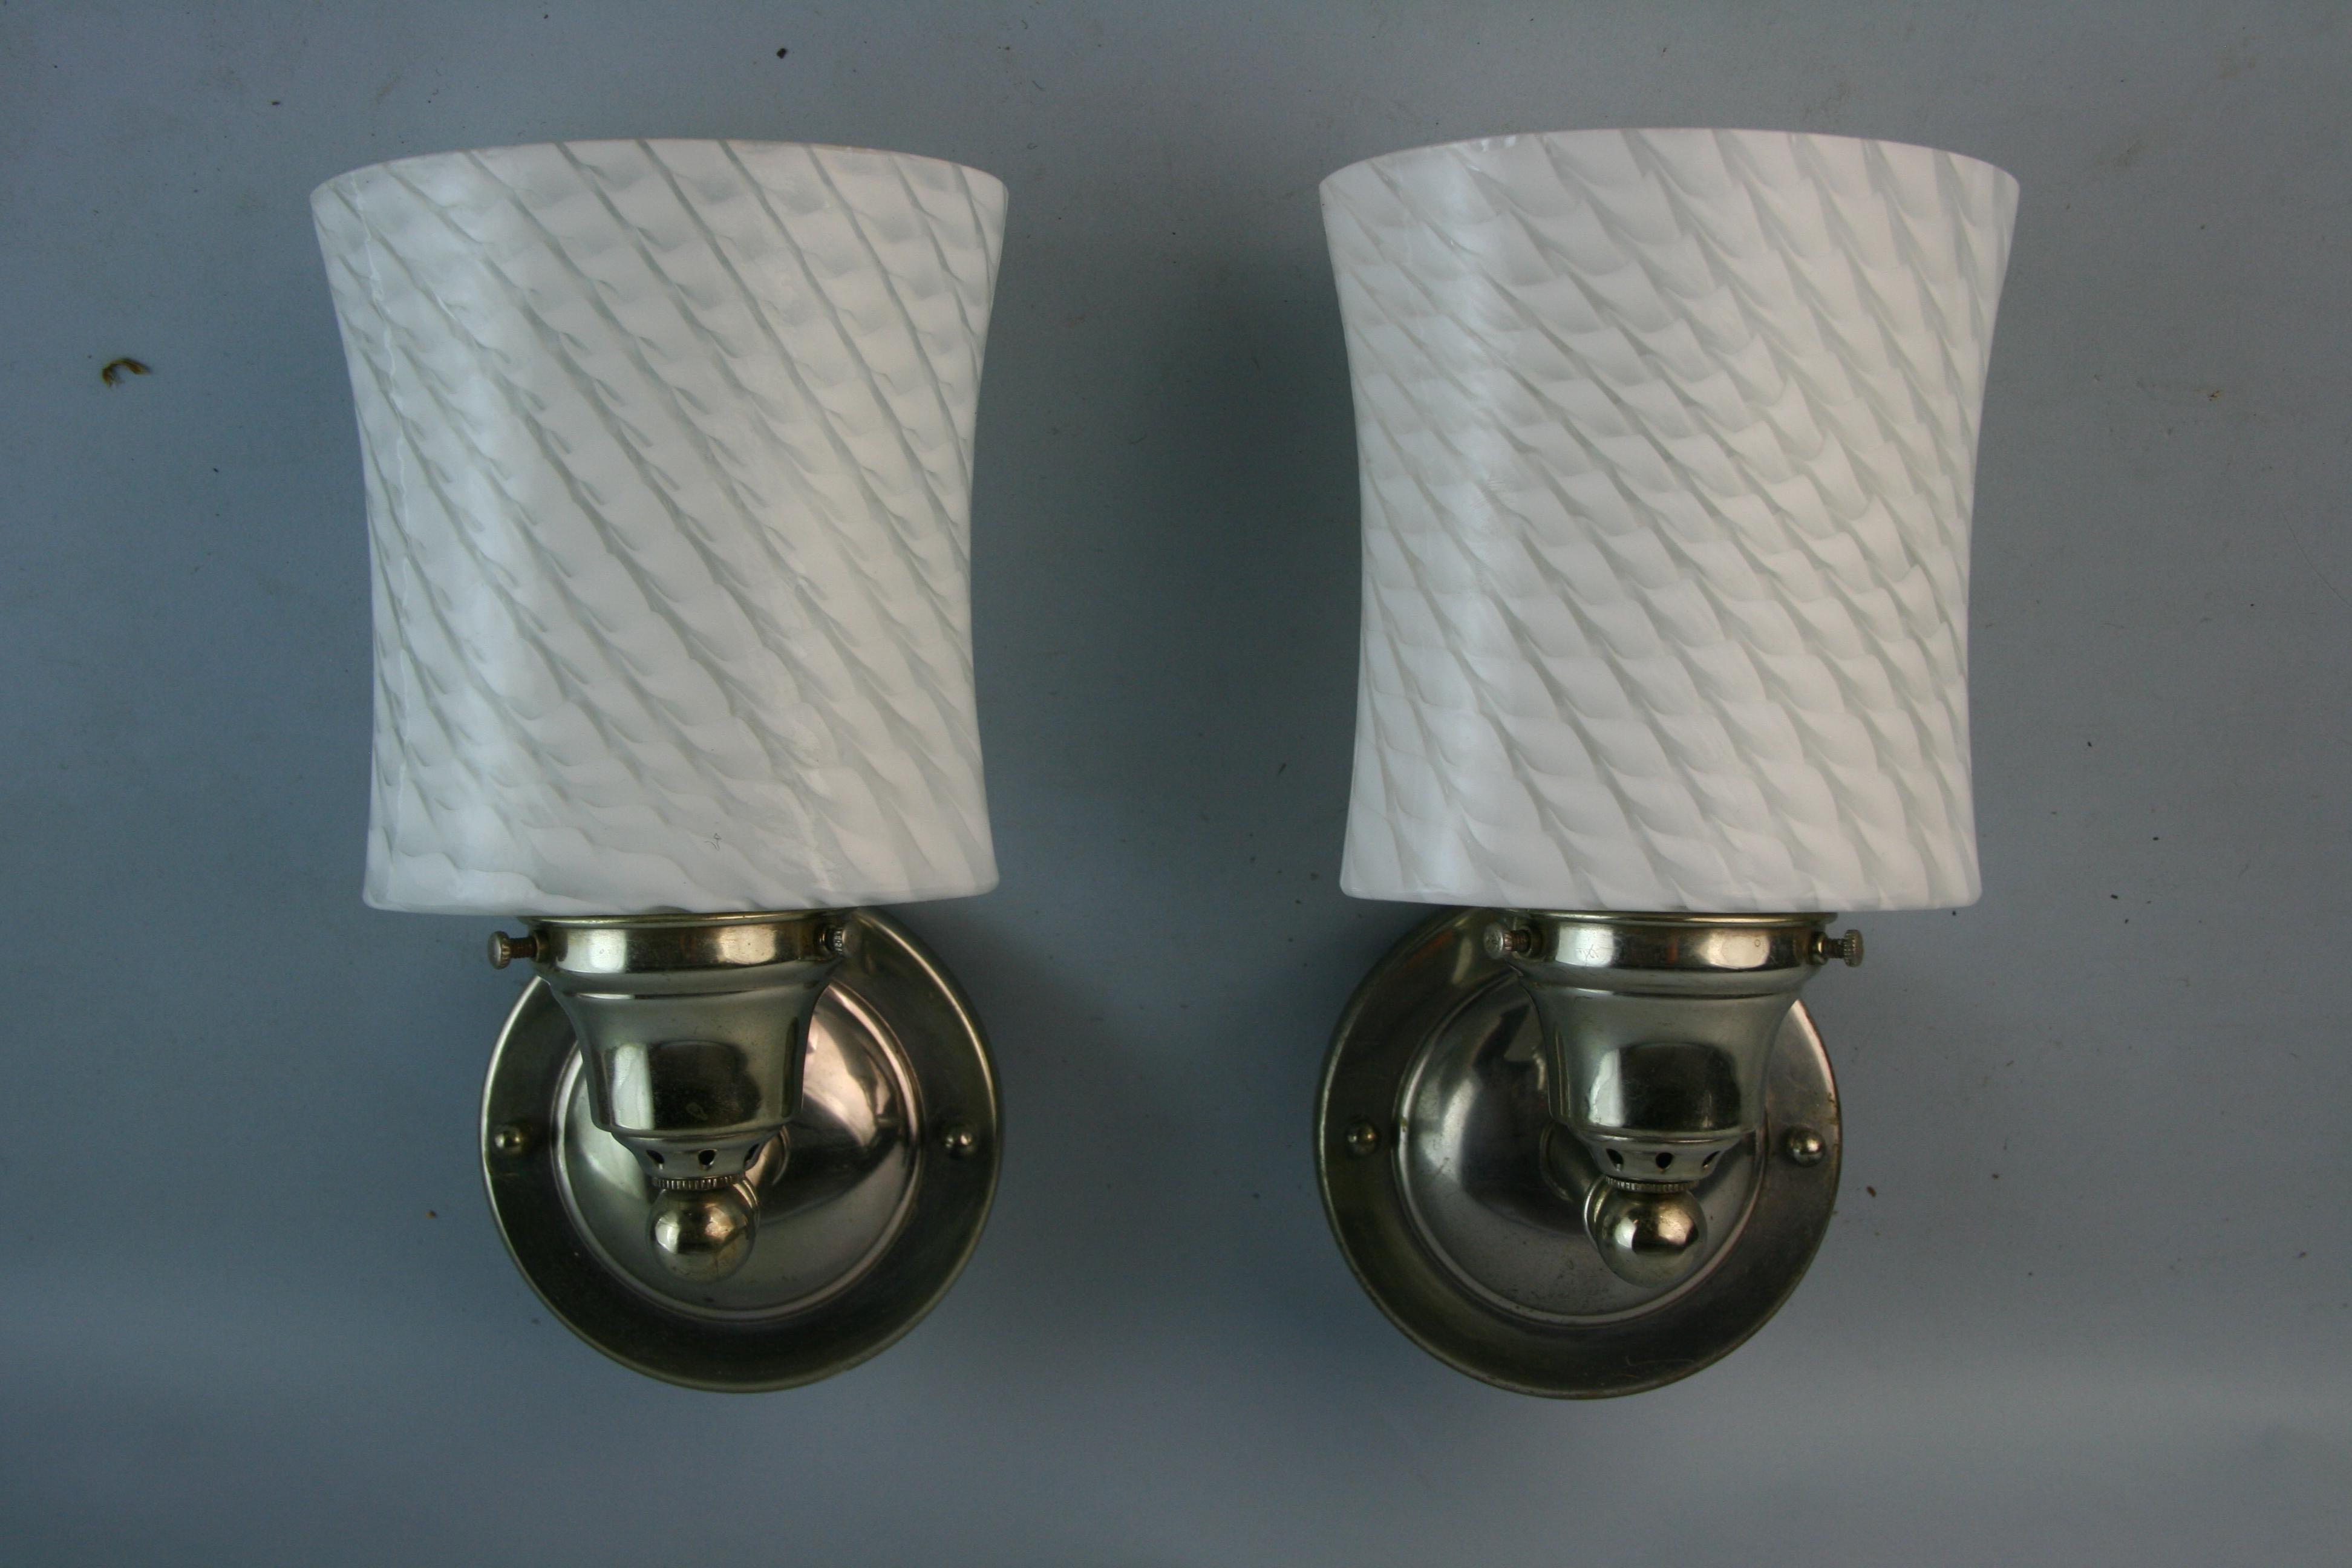 Pair Murano patterned glass sconces with nickeled brass arms and backplate
Takes one Edison 60 watt bulb